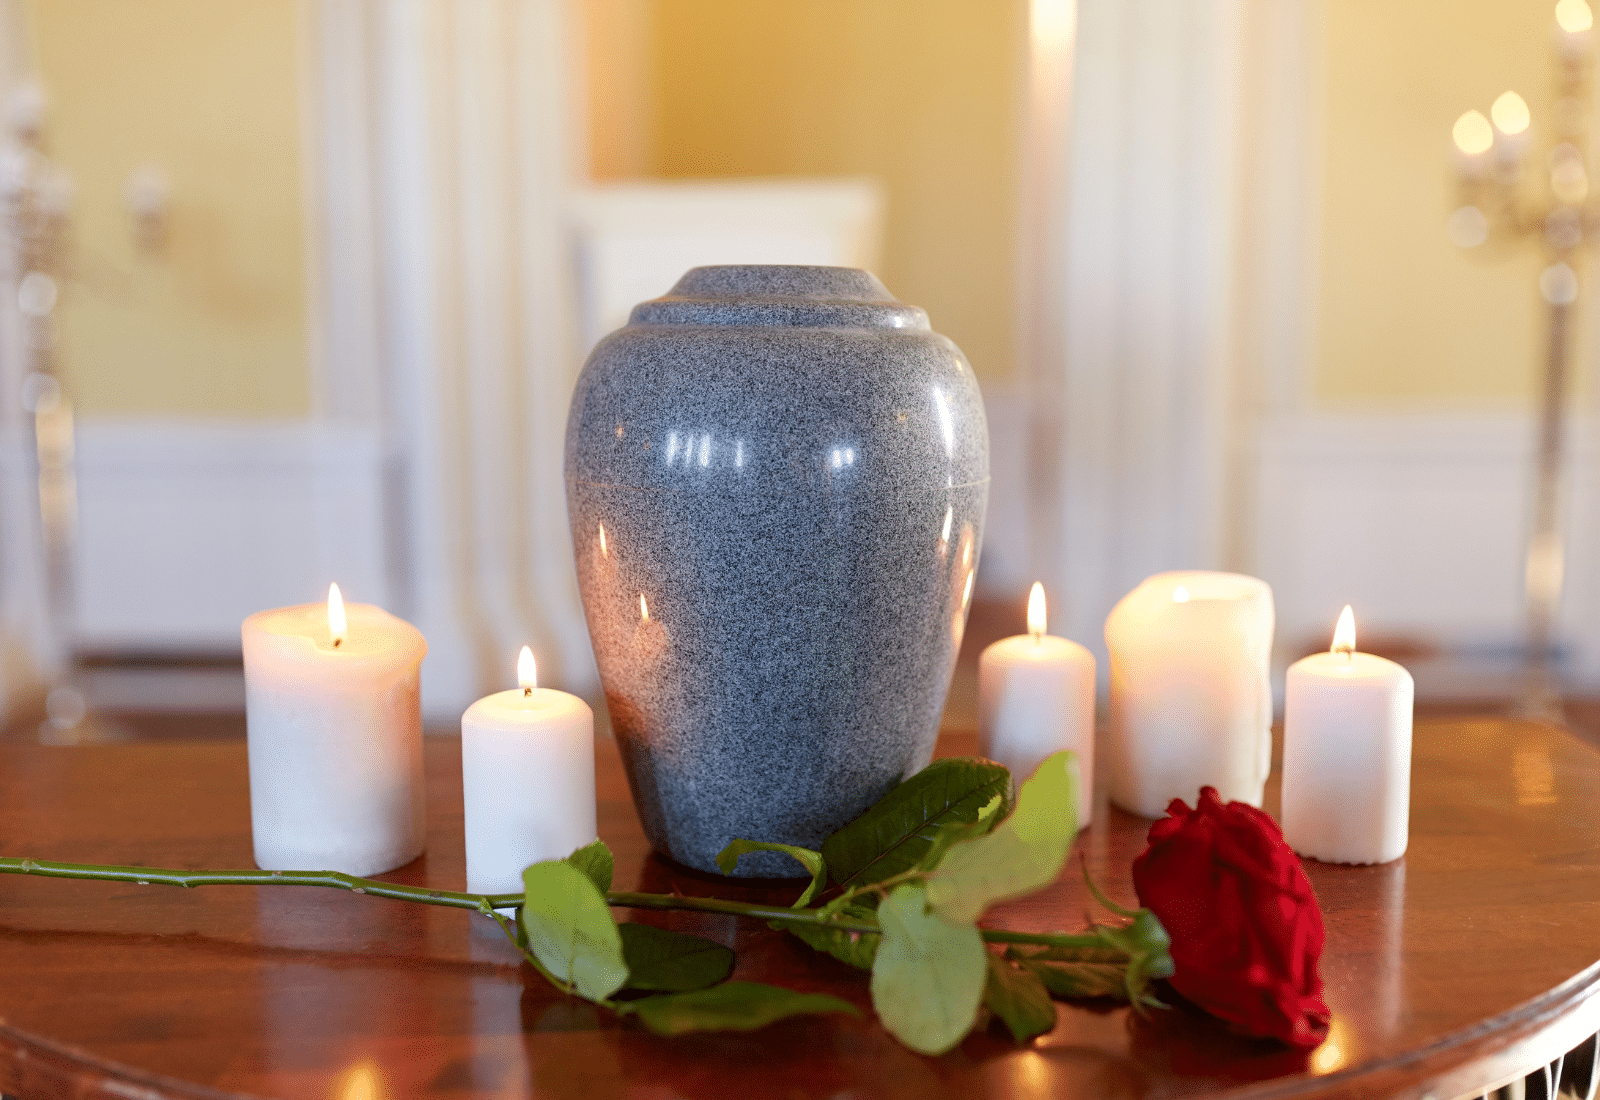 Image of a cremation urn with candles and a rose